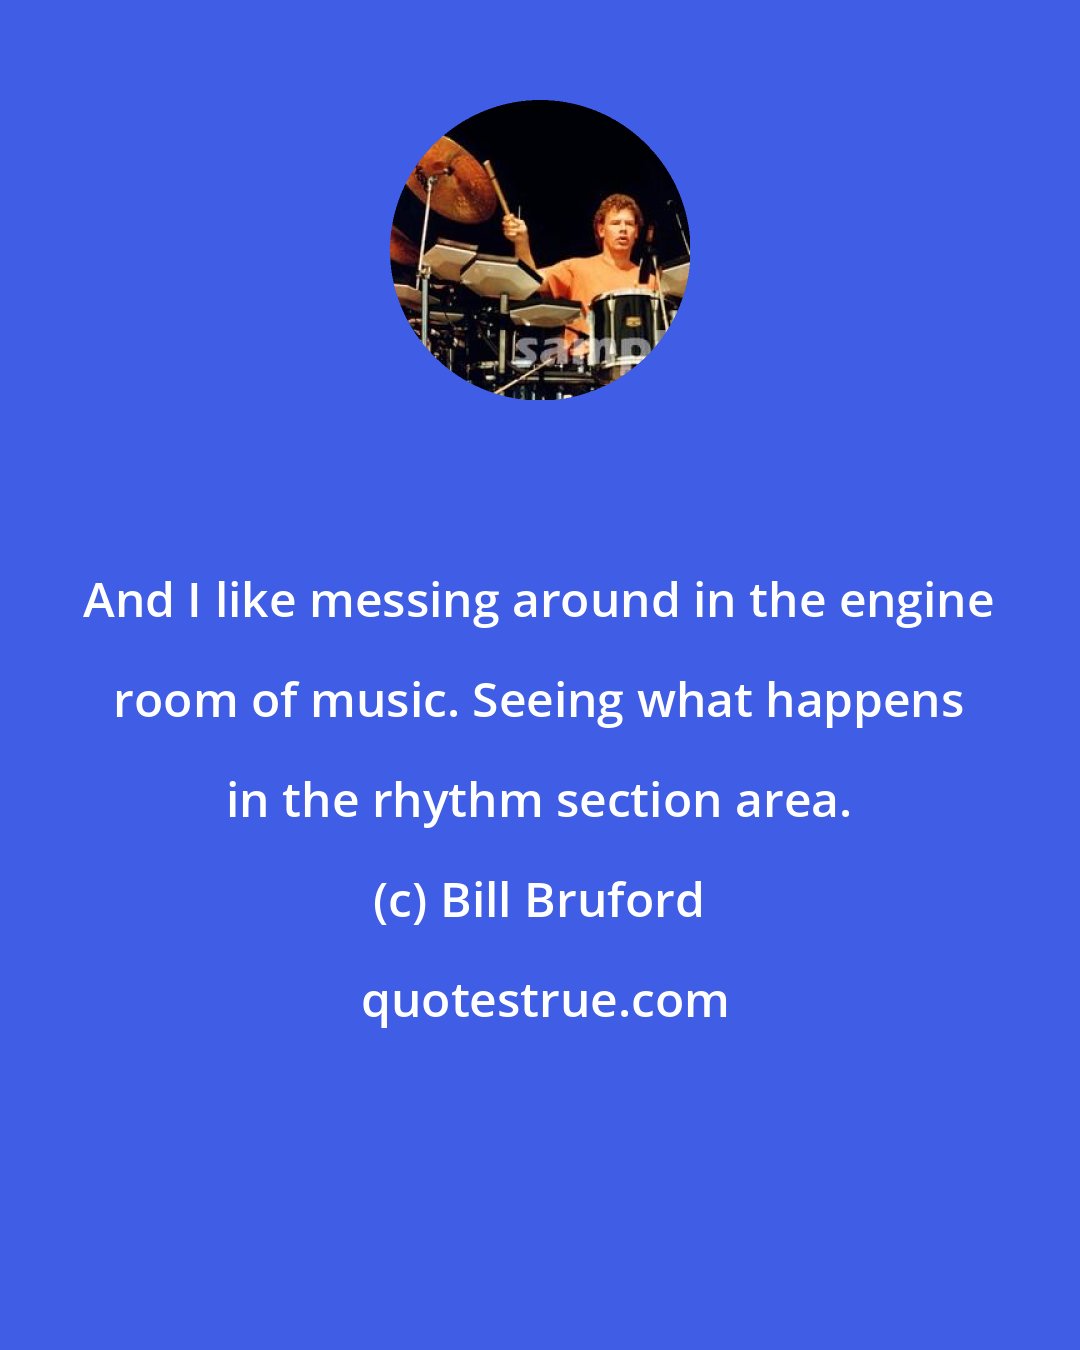 Bill Bruford: And I like messing around in the engine room of music. Seeing what happens in the rhythm section area.